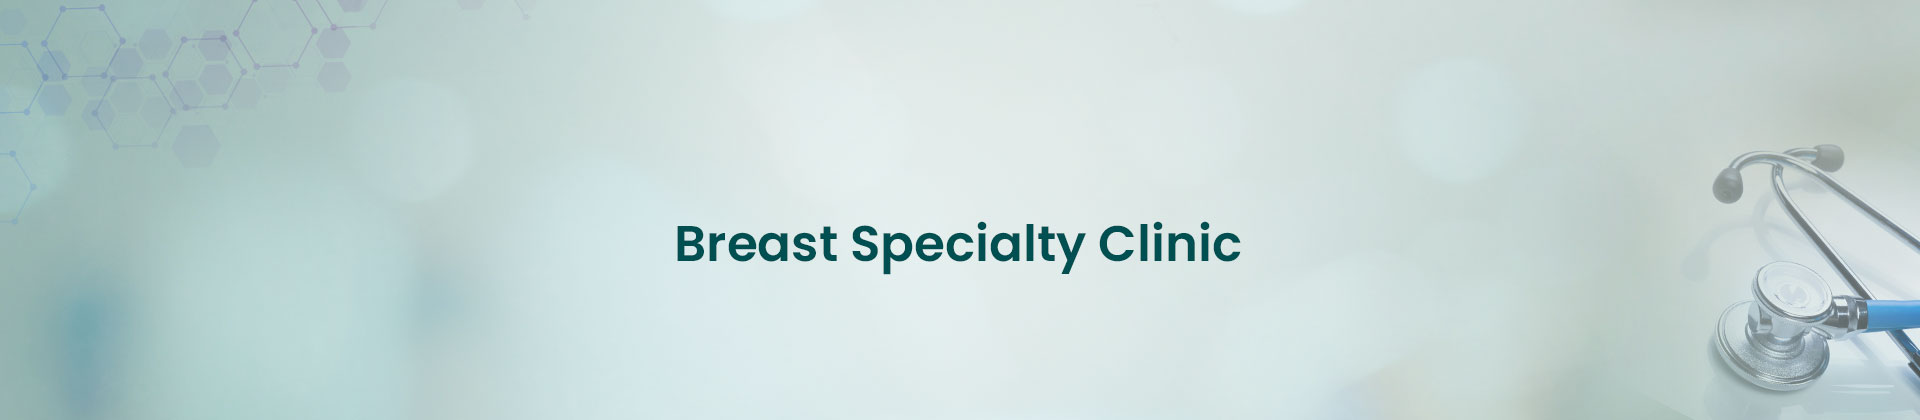 Breast Specialty Clinic